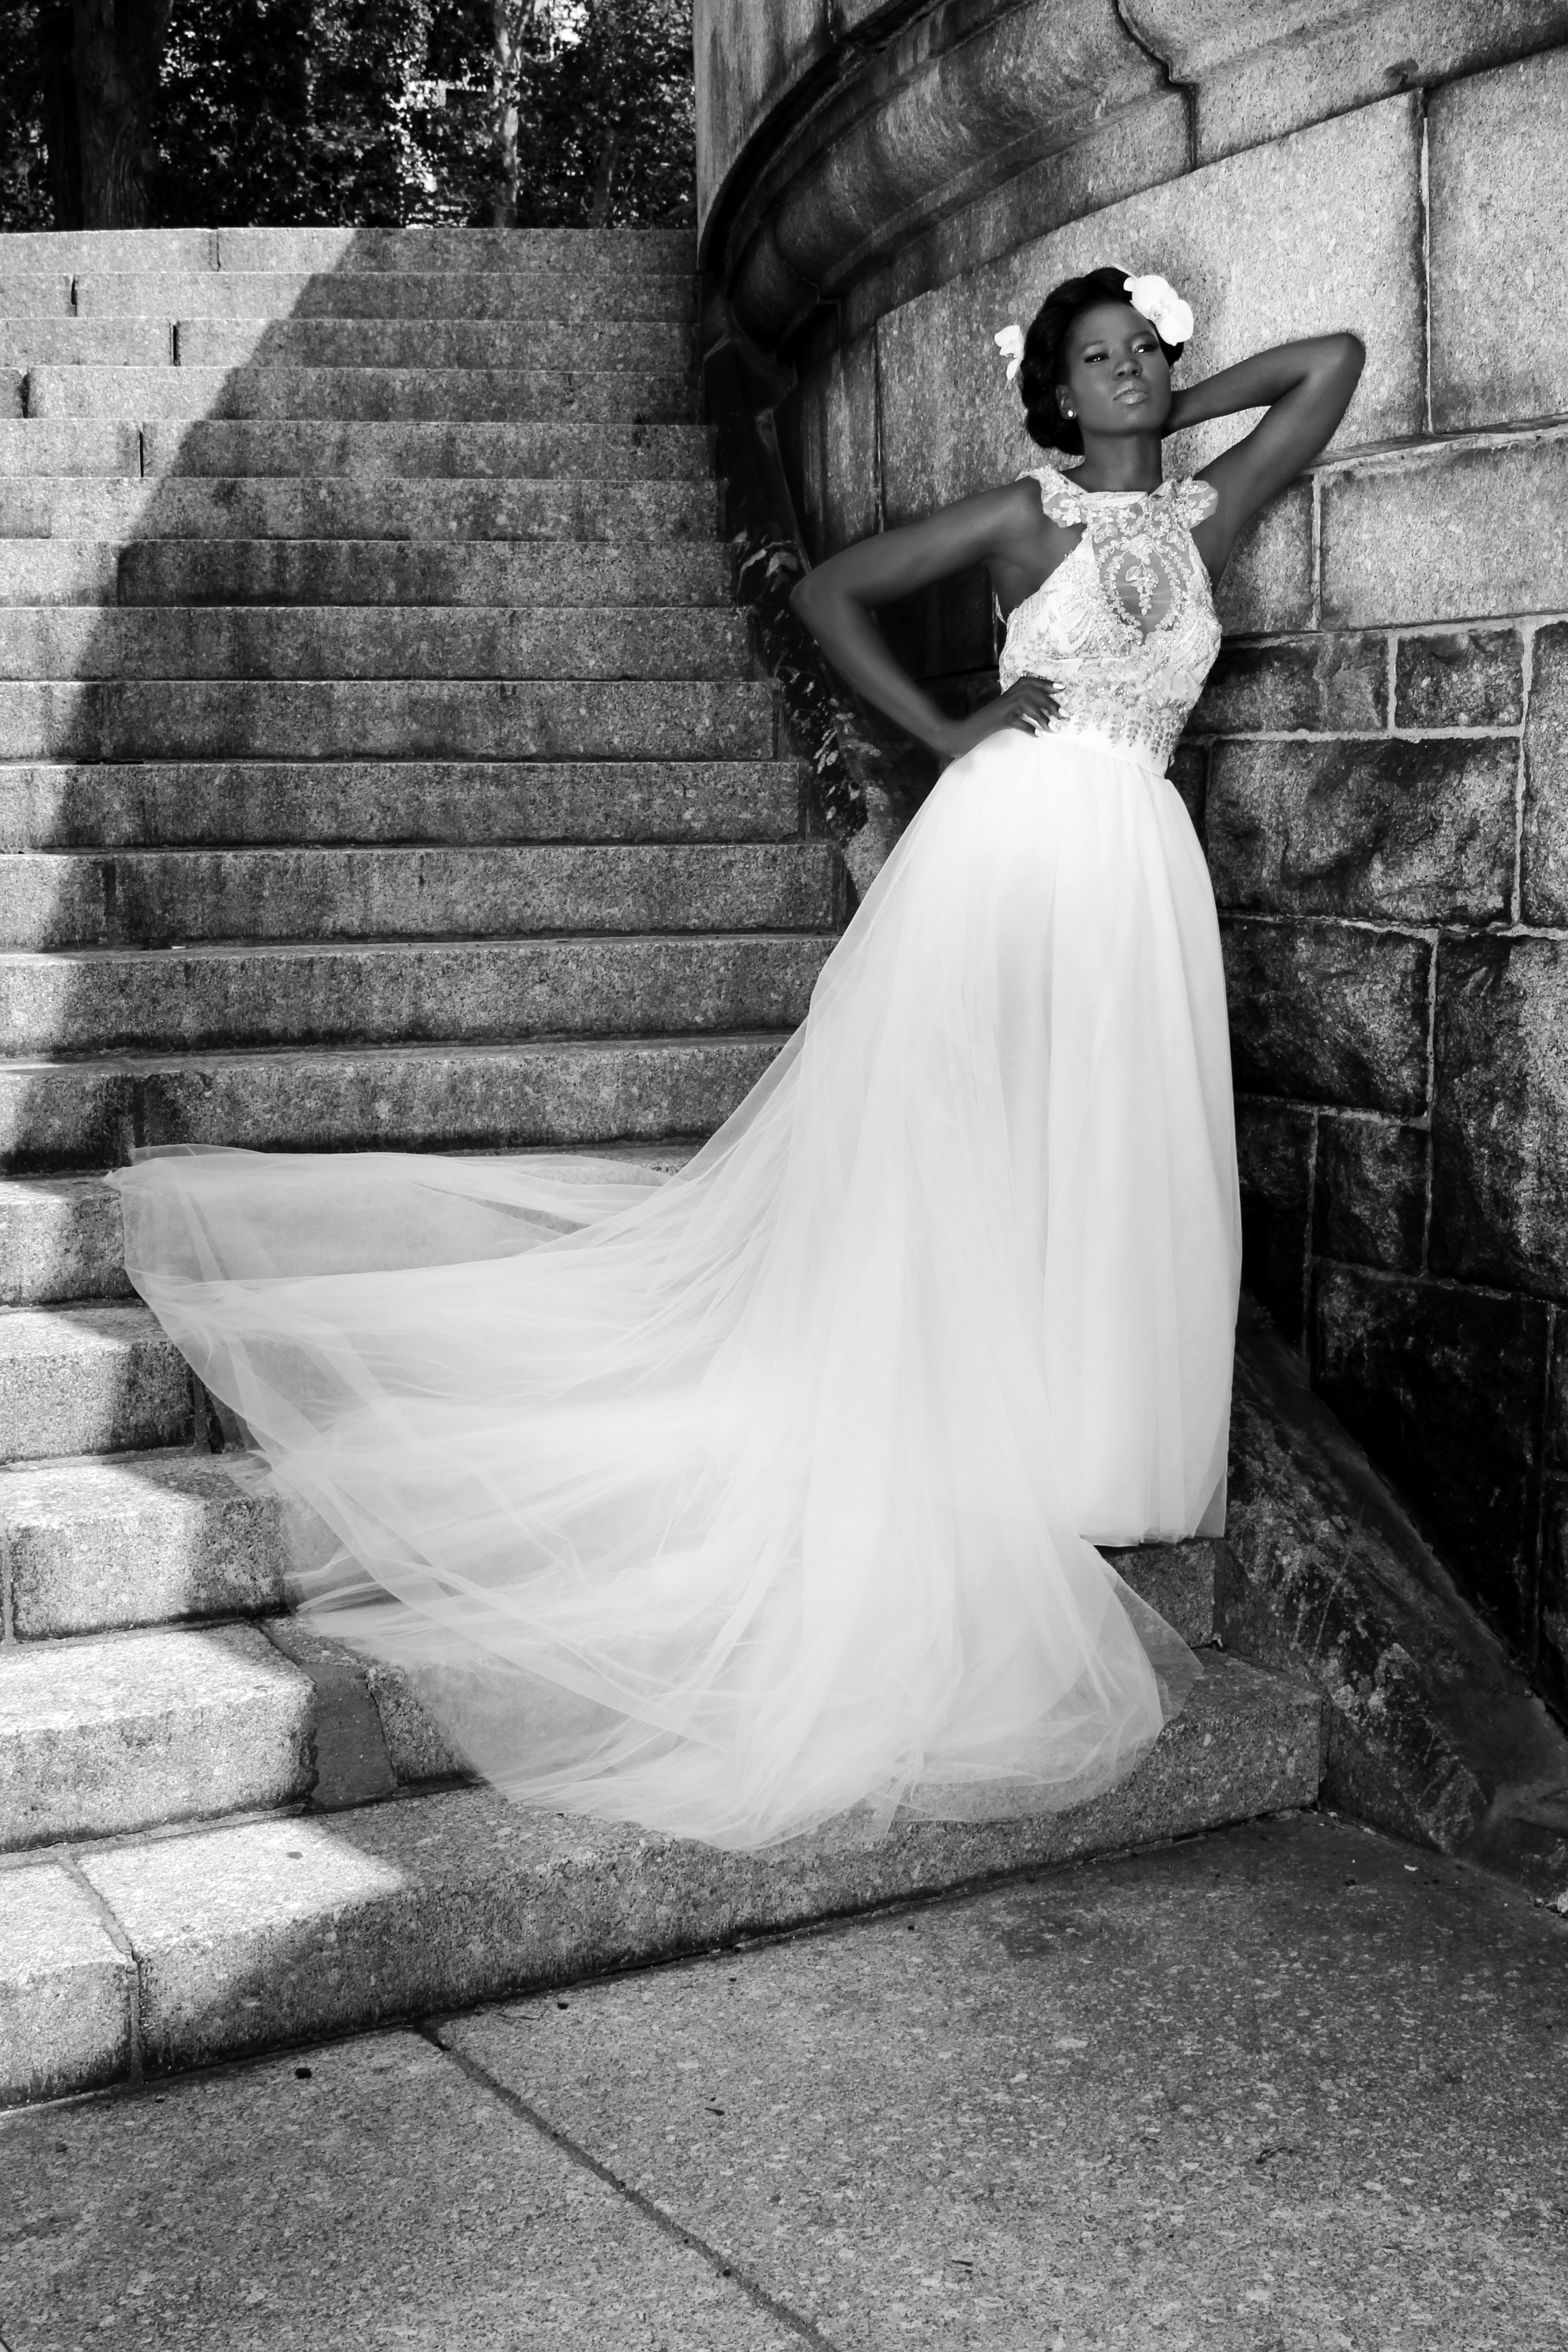 18_halter front gown w. cathedral train_bw.jpg